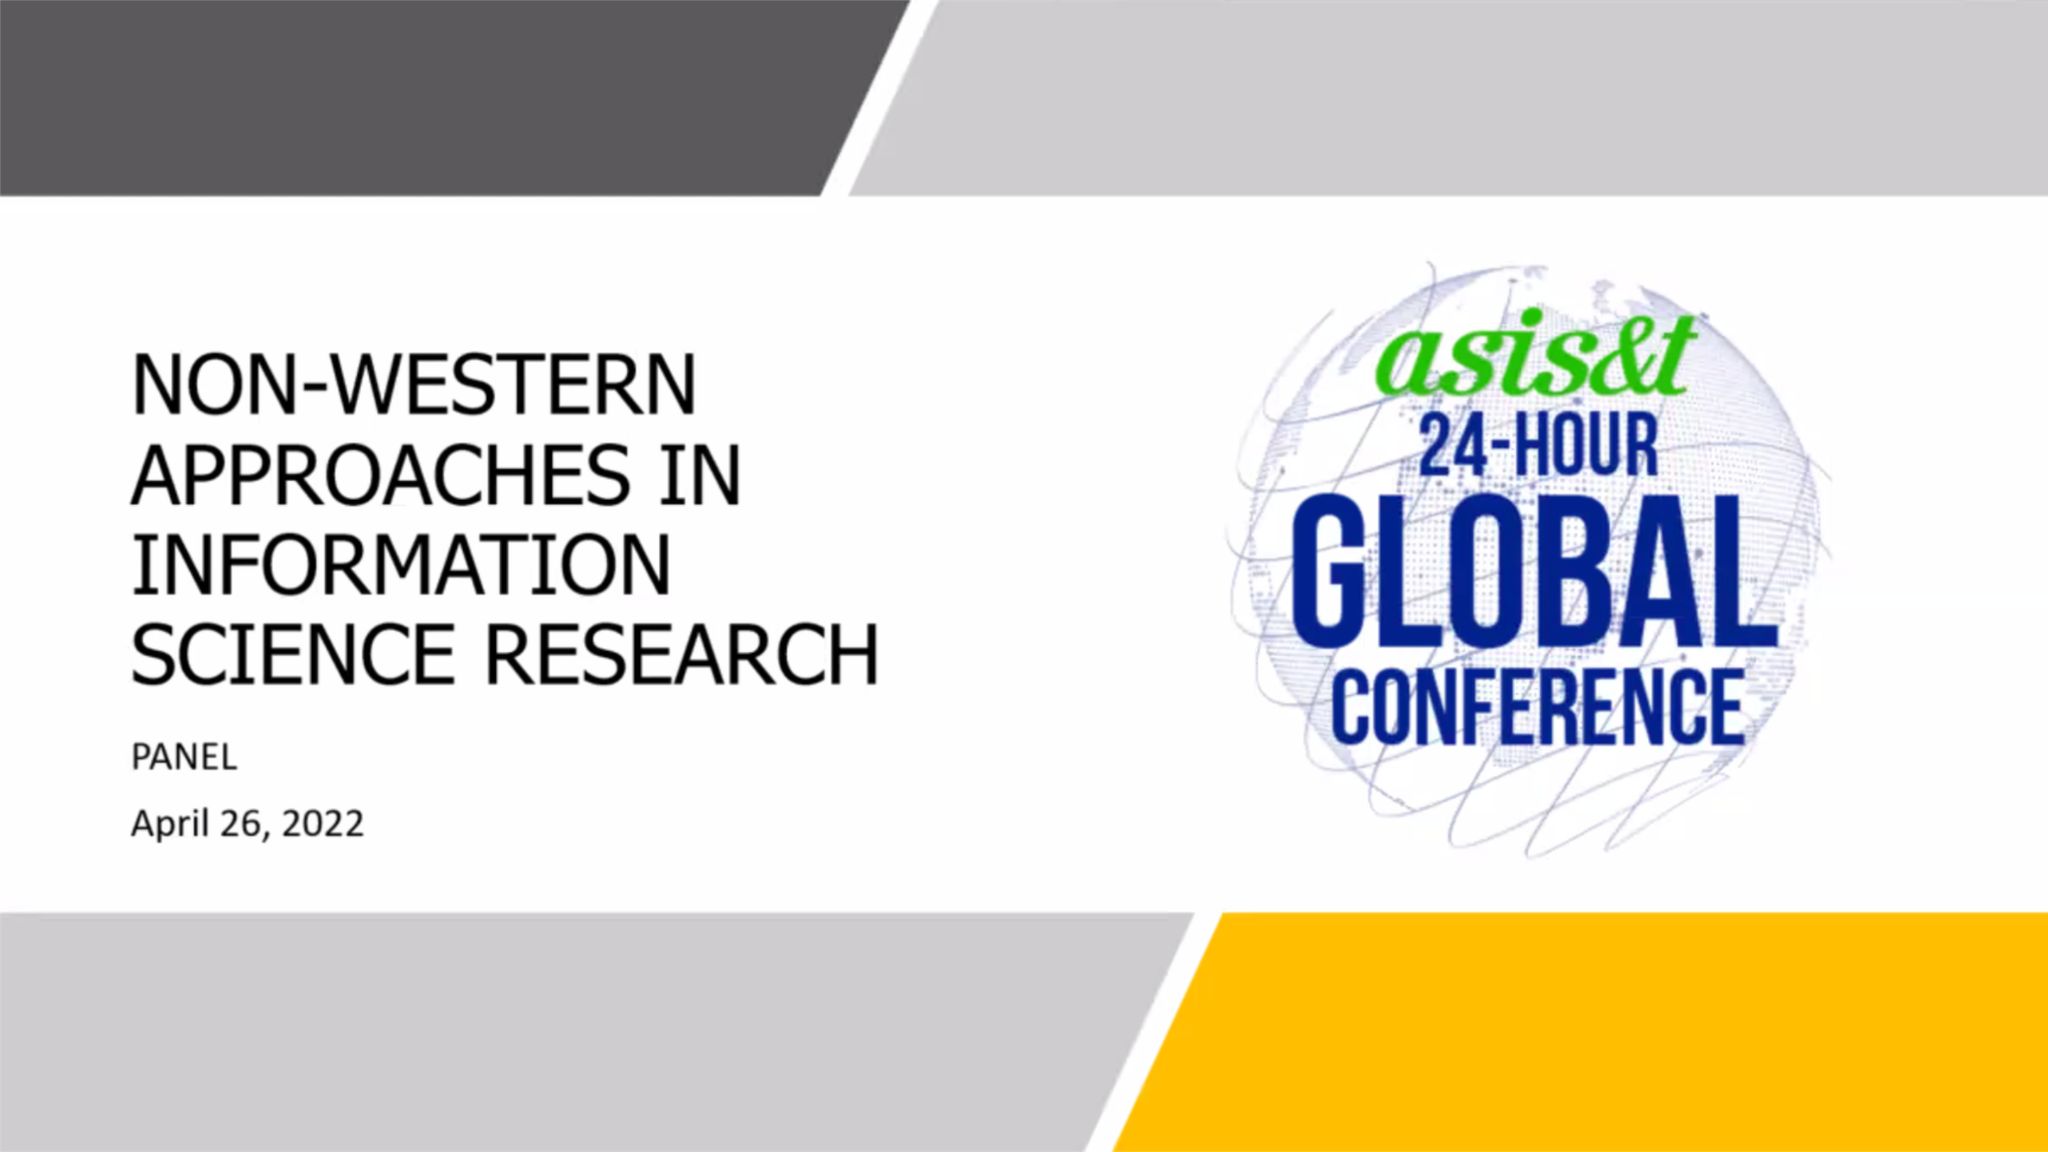 Faculty Members Represent UPSLIS in ASIS&T 24-Hour Global Conference